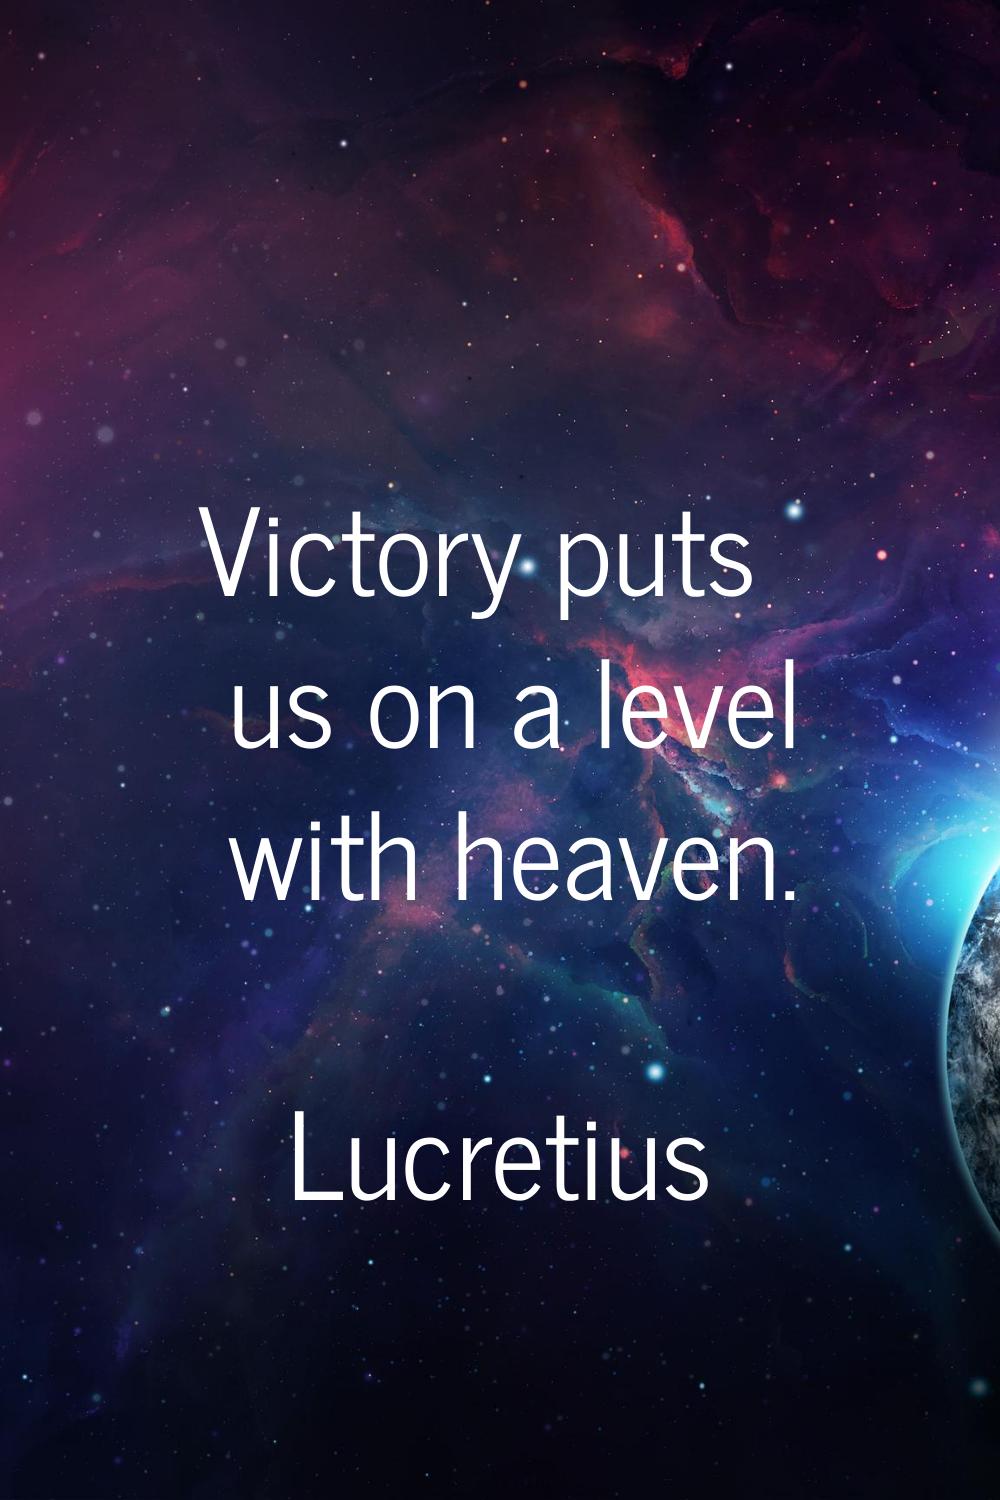 Victory puts us on a level with heaven.